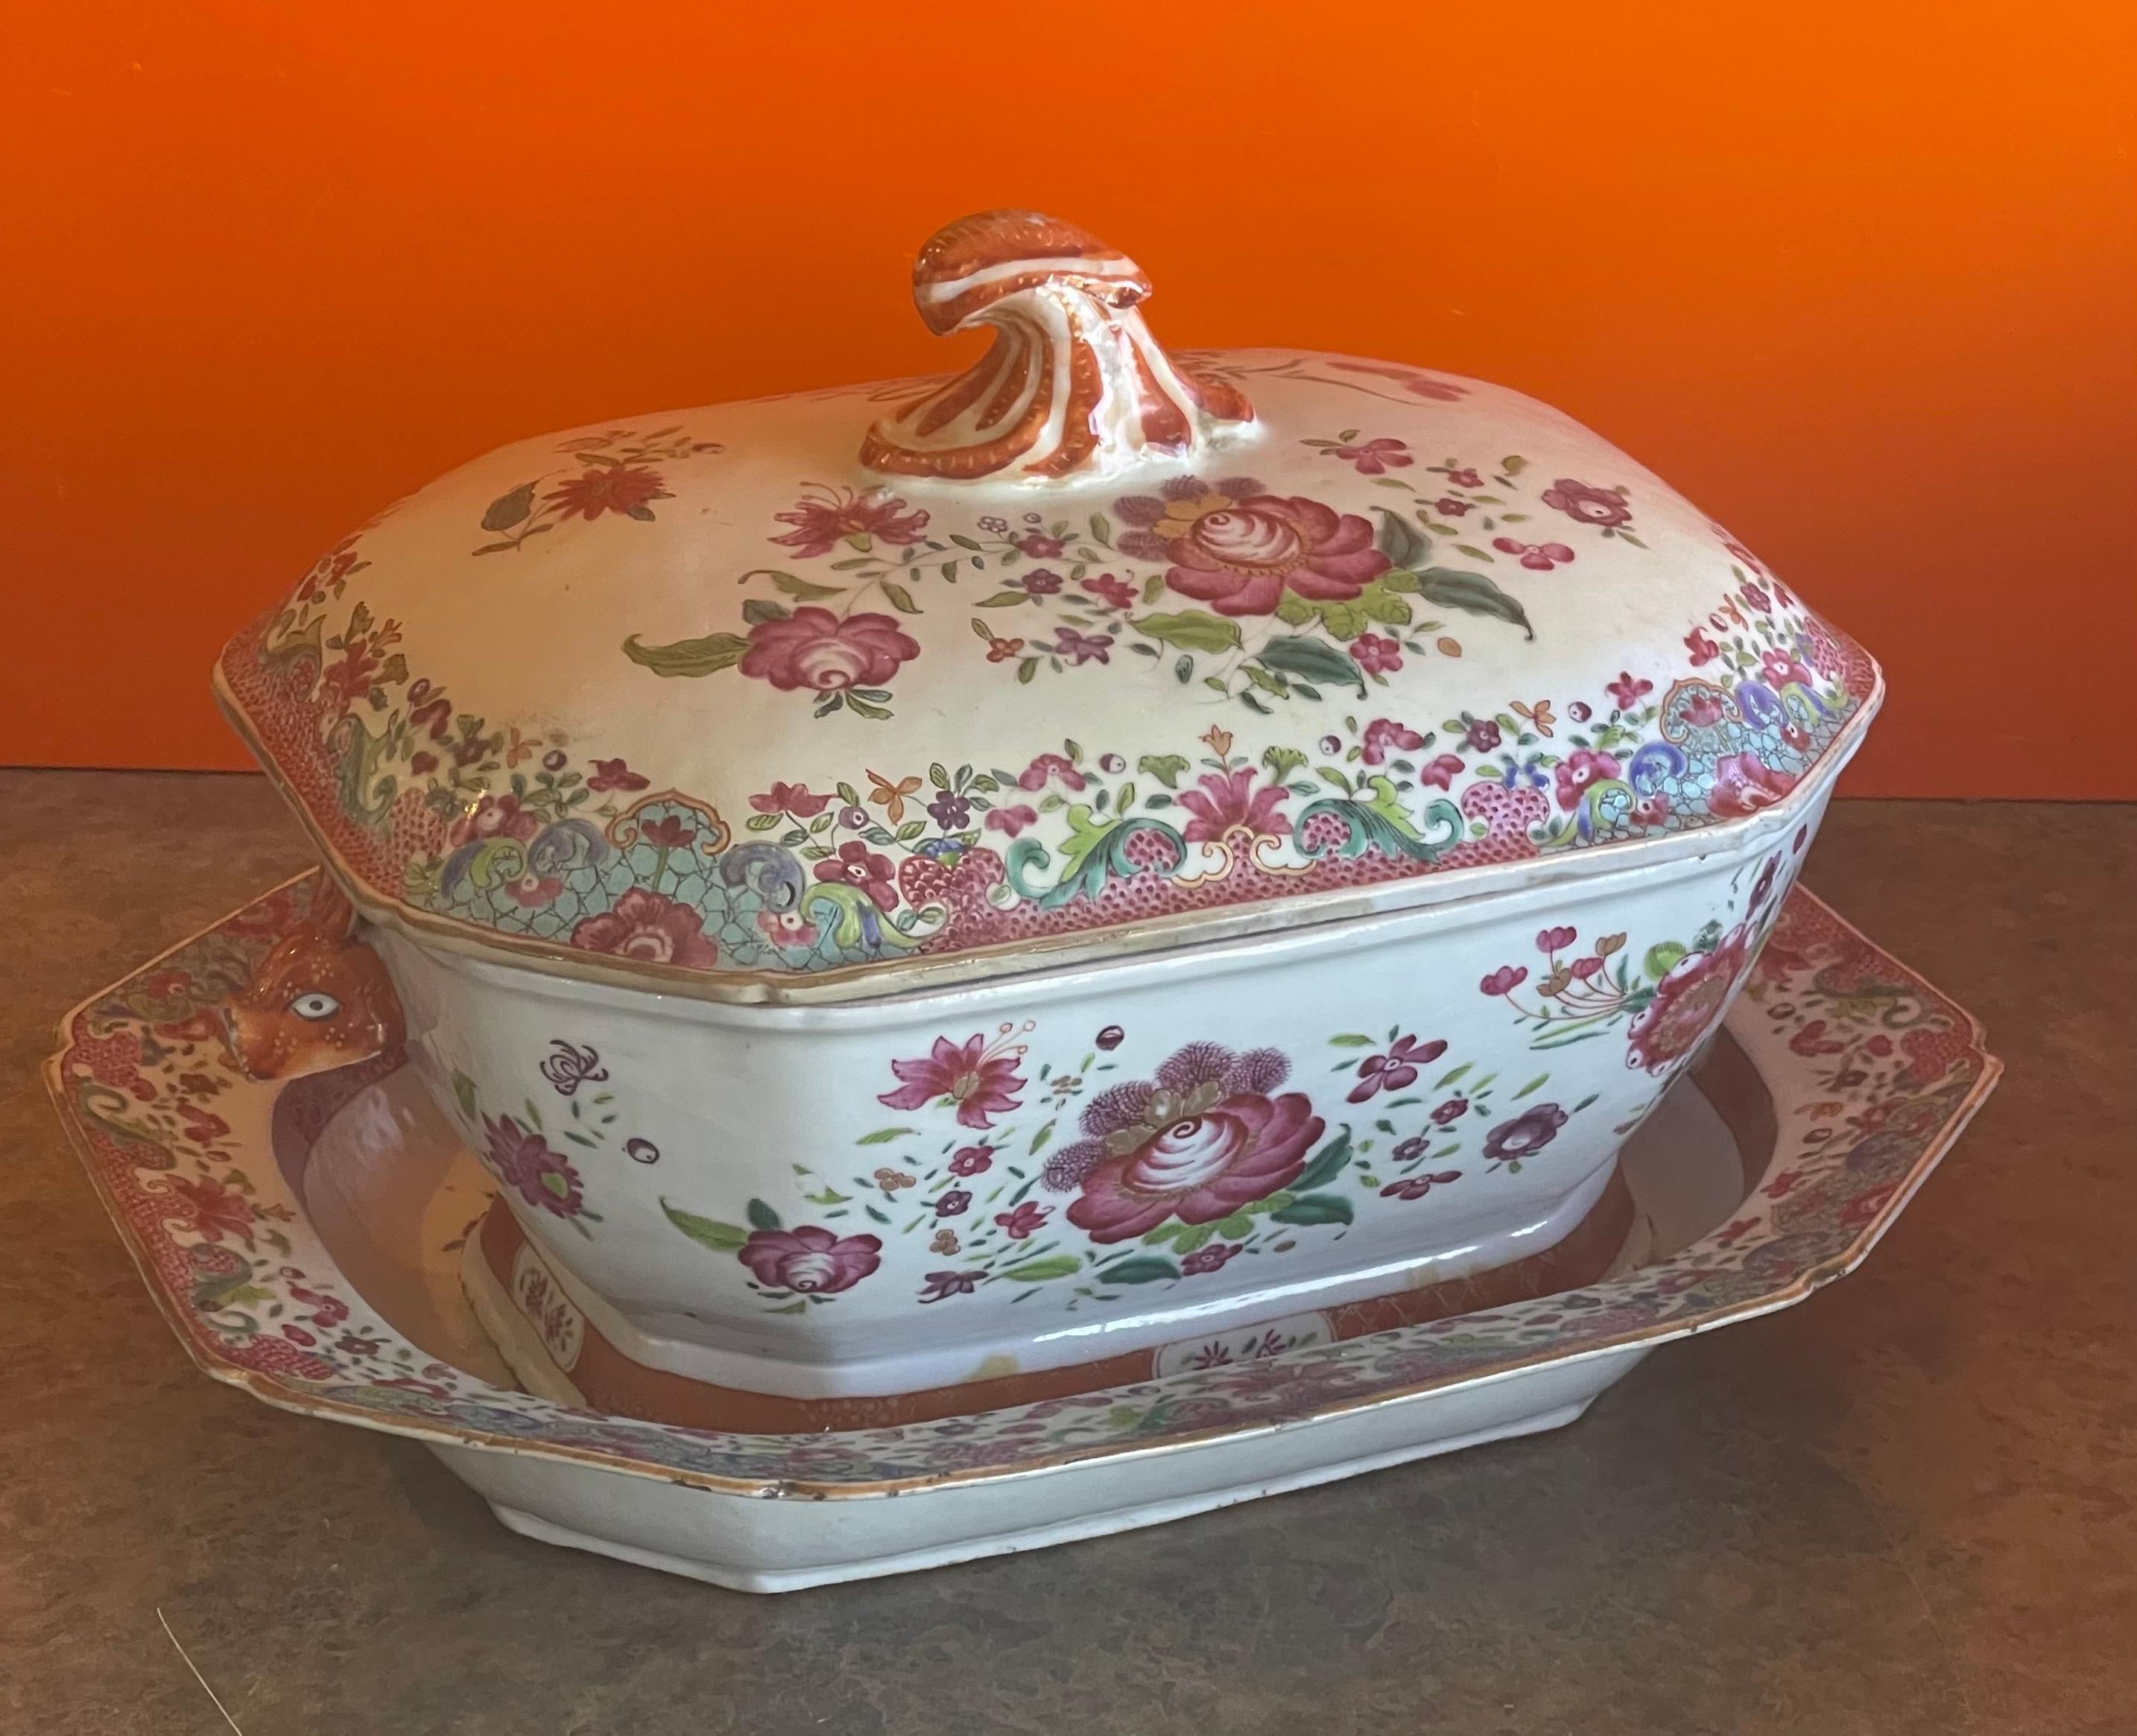 A very nice mid 19th century Chinese export porcelain soup tureen with under plate, circa 1850s. The stand is in very good vintage condition with no chips or cracks and measures 14.5